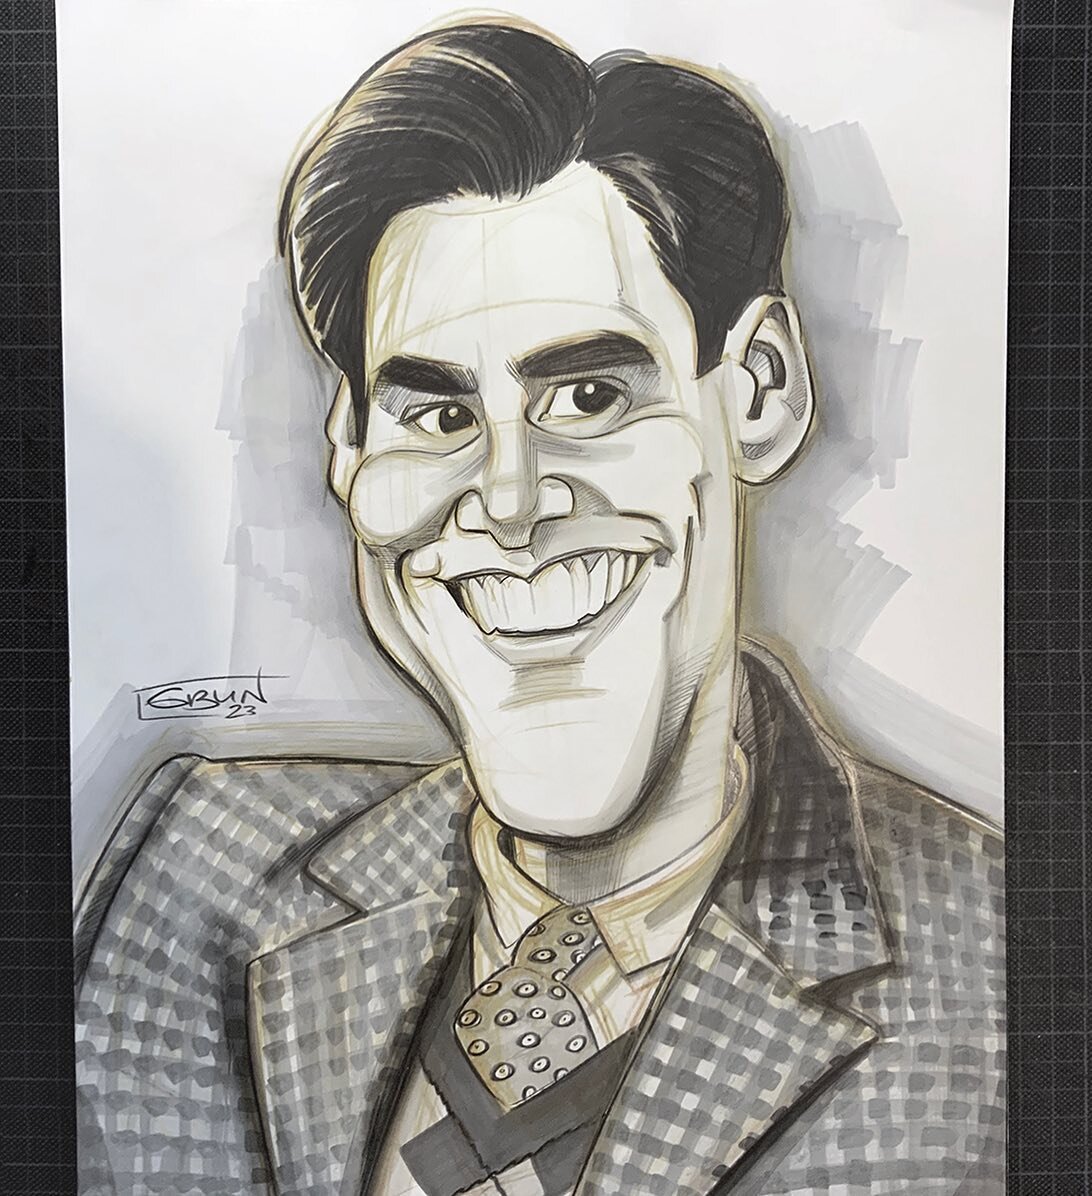 Don&rsquo;t think I ever shared this sketch commission of Jim Carrey as Truman, which I completed and shipped in early December.

Want to commission a sketch? DM me! 🤙

#jimcarrey #thetrumanshow #jimcarreyart #fanart #movieart #movieportrait #sketch